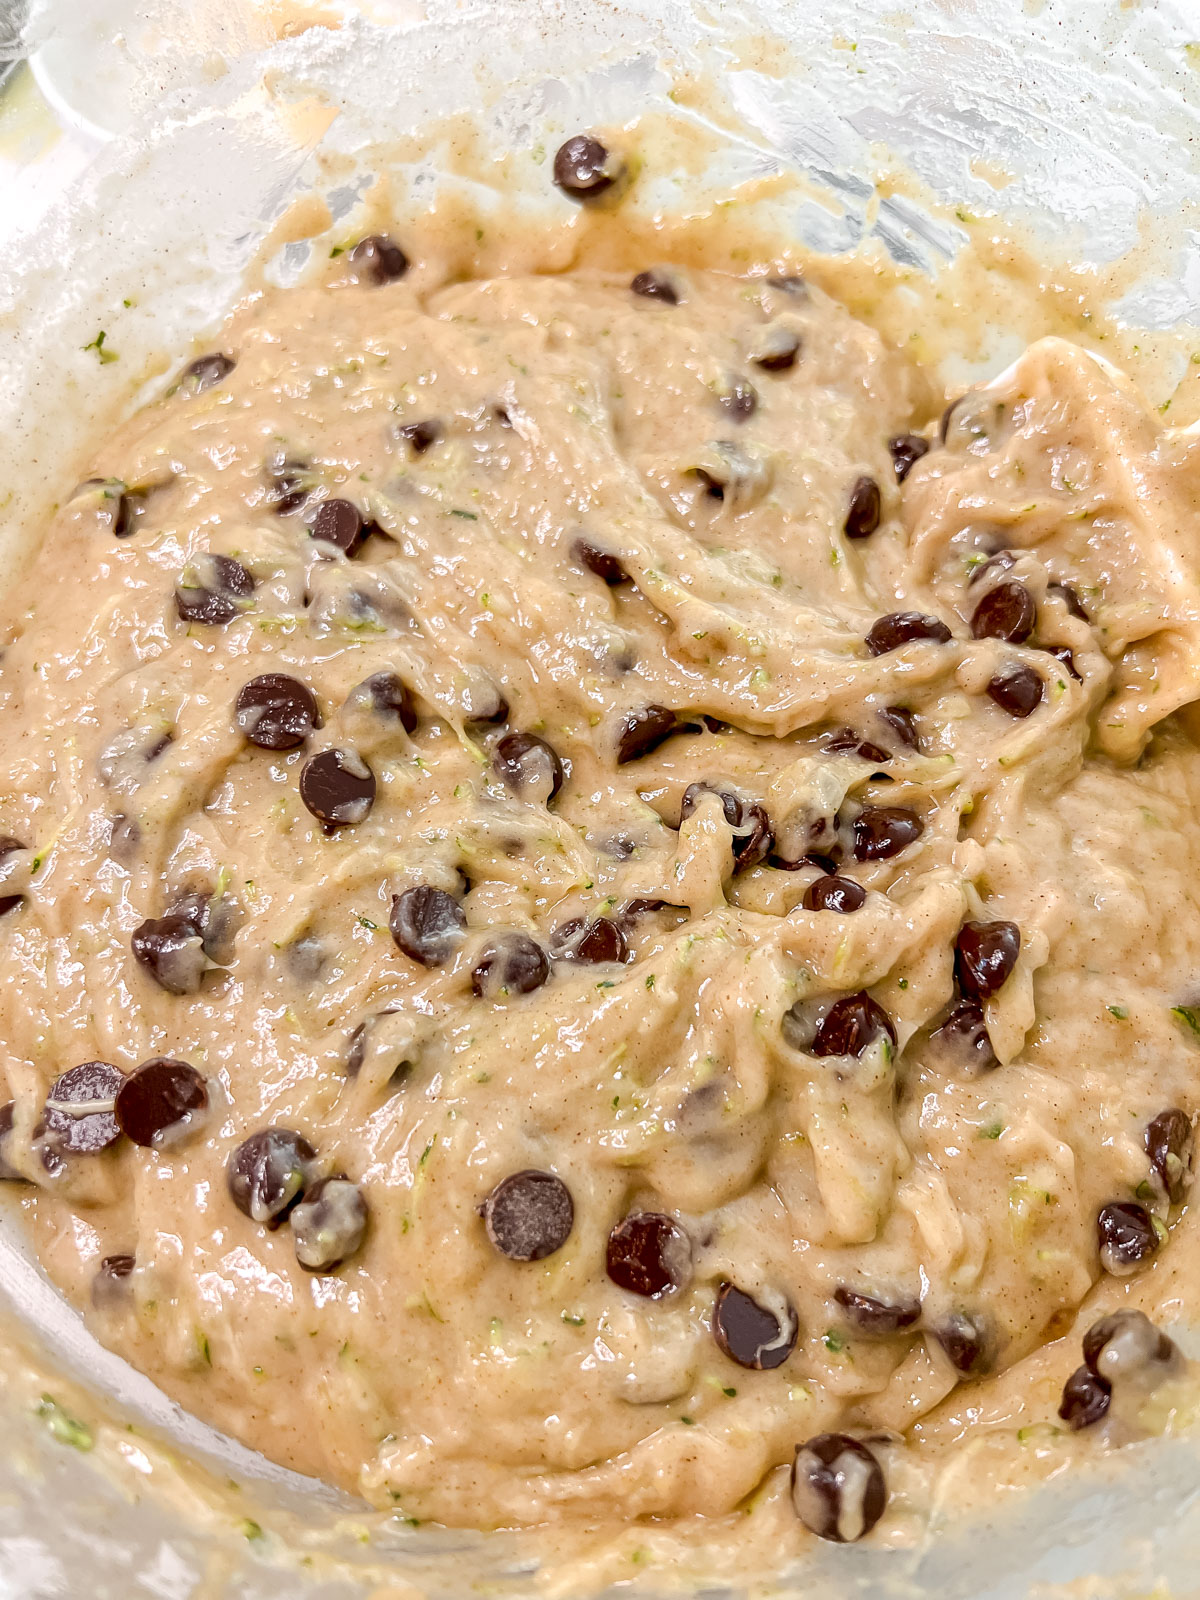 In a clear bowl the vegan zucchini bread batter with chocolate chips. 